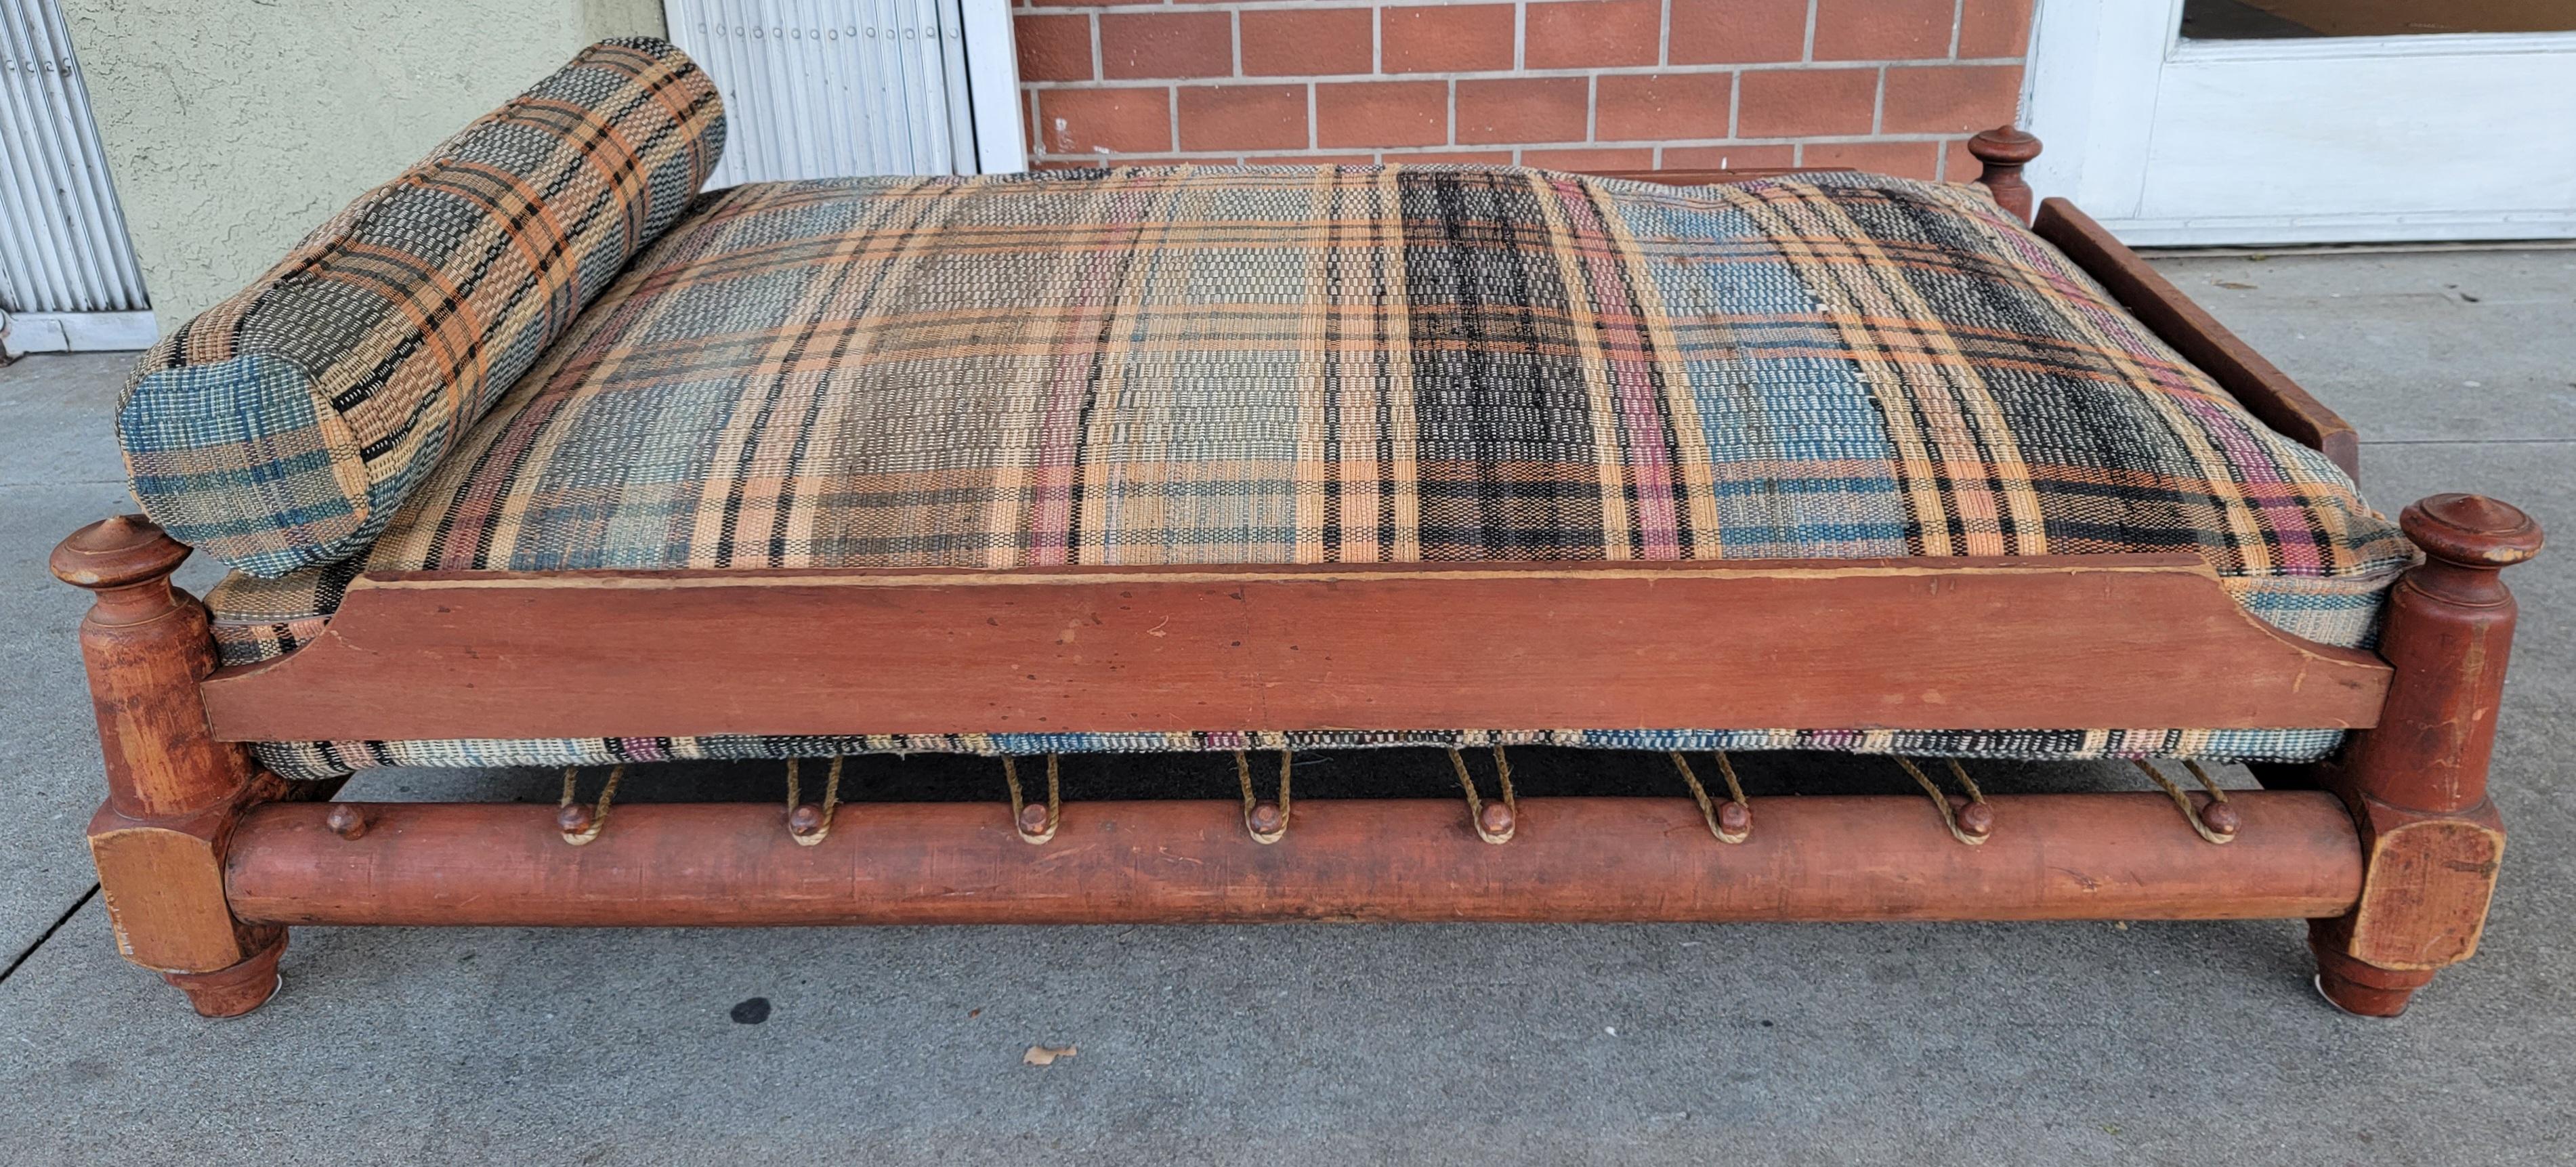 American 19th C Original Salmon Painted Trendle Bed W/ Rag Rug Cushion For Sale